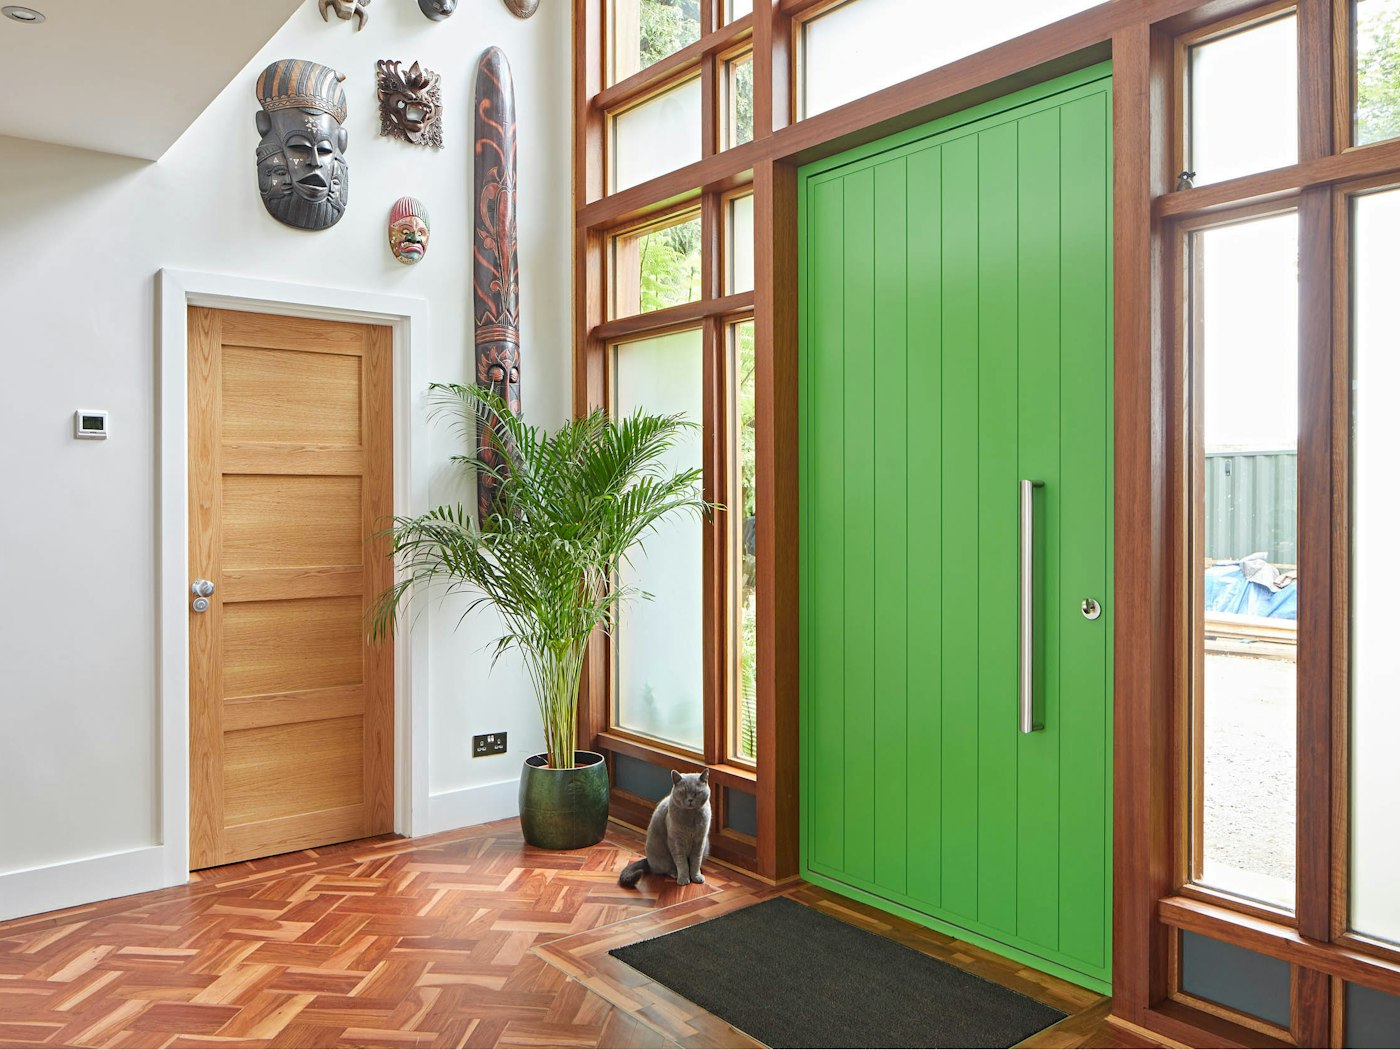 Internally, warm parquet flooring works well with the aluminium curtain frame and nicely contrasts with the vivid green door 